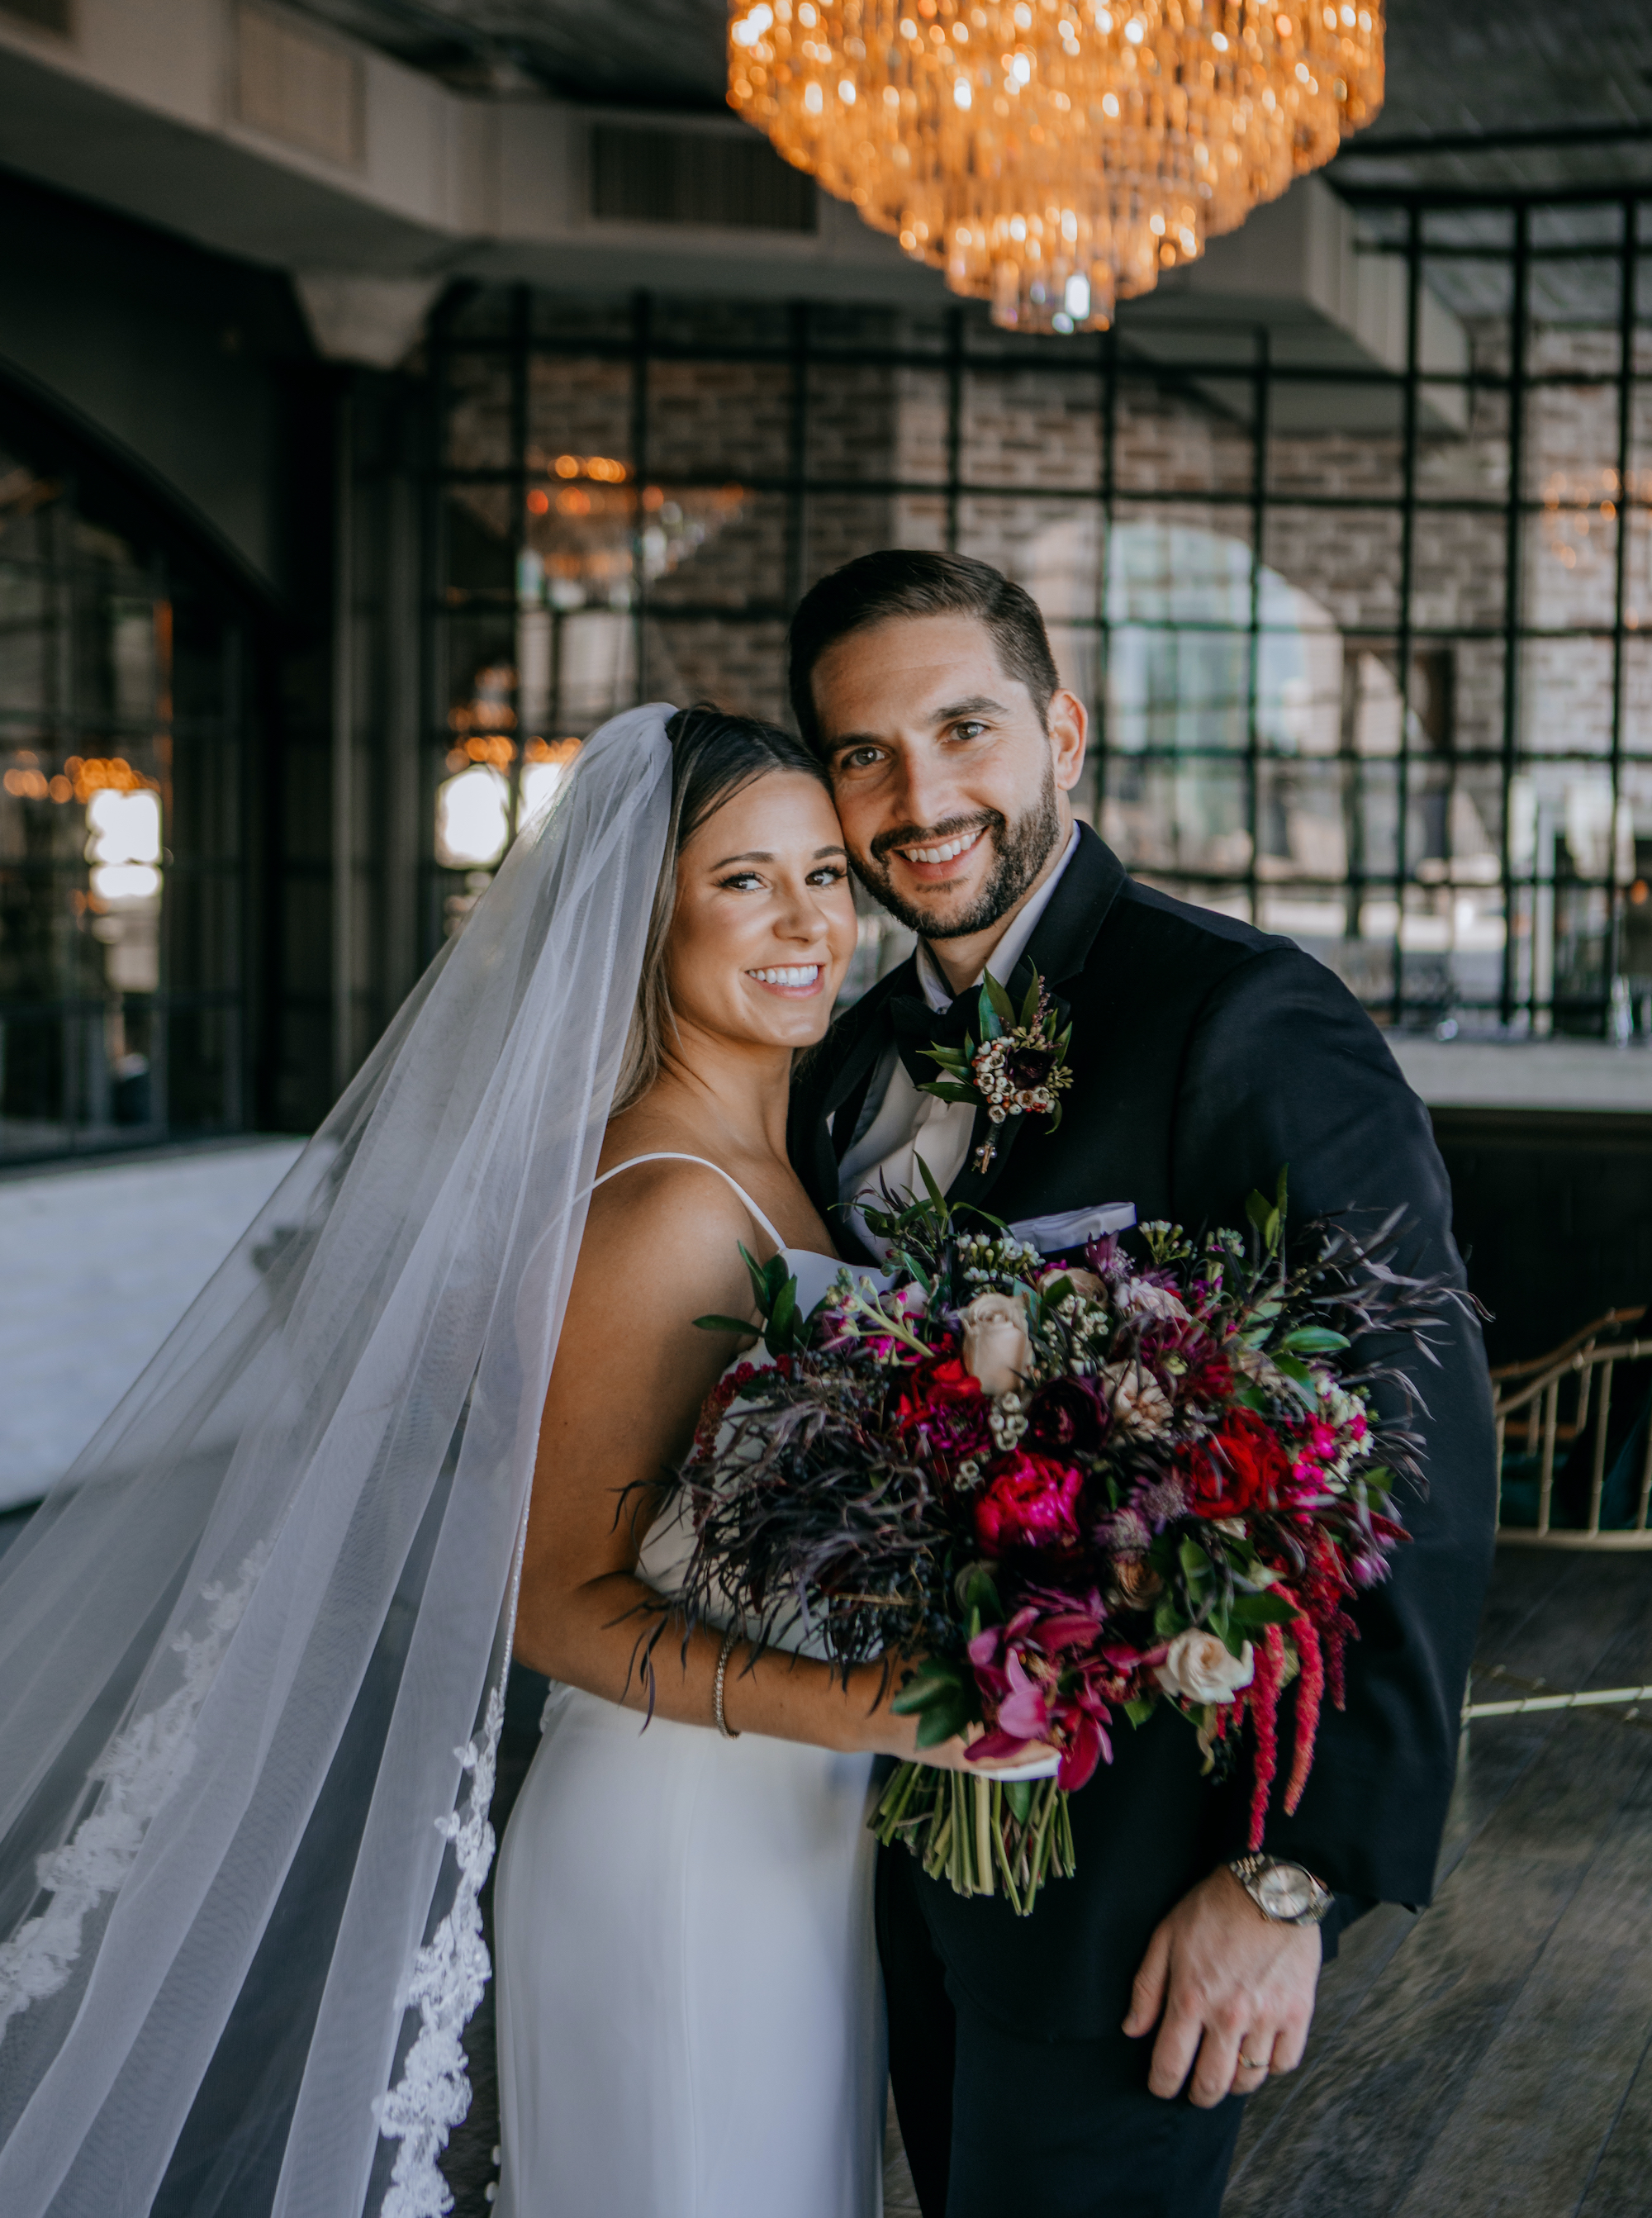 A bride and groom smile together while the bride holds her jewel-toned bridal bouquet at a Houston wedding venue.